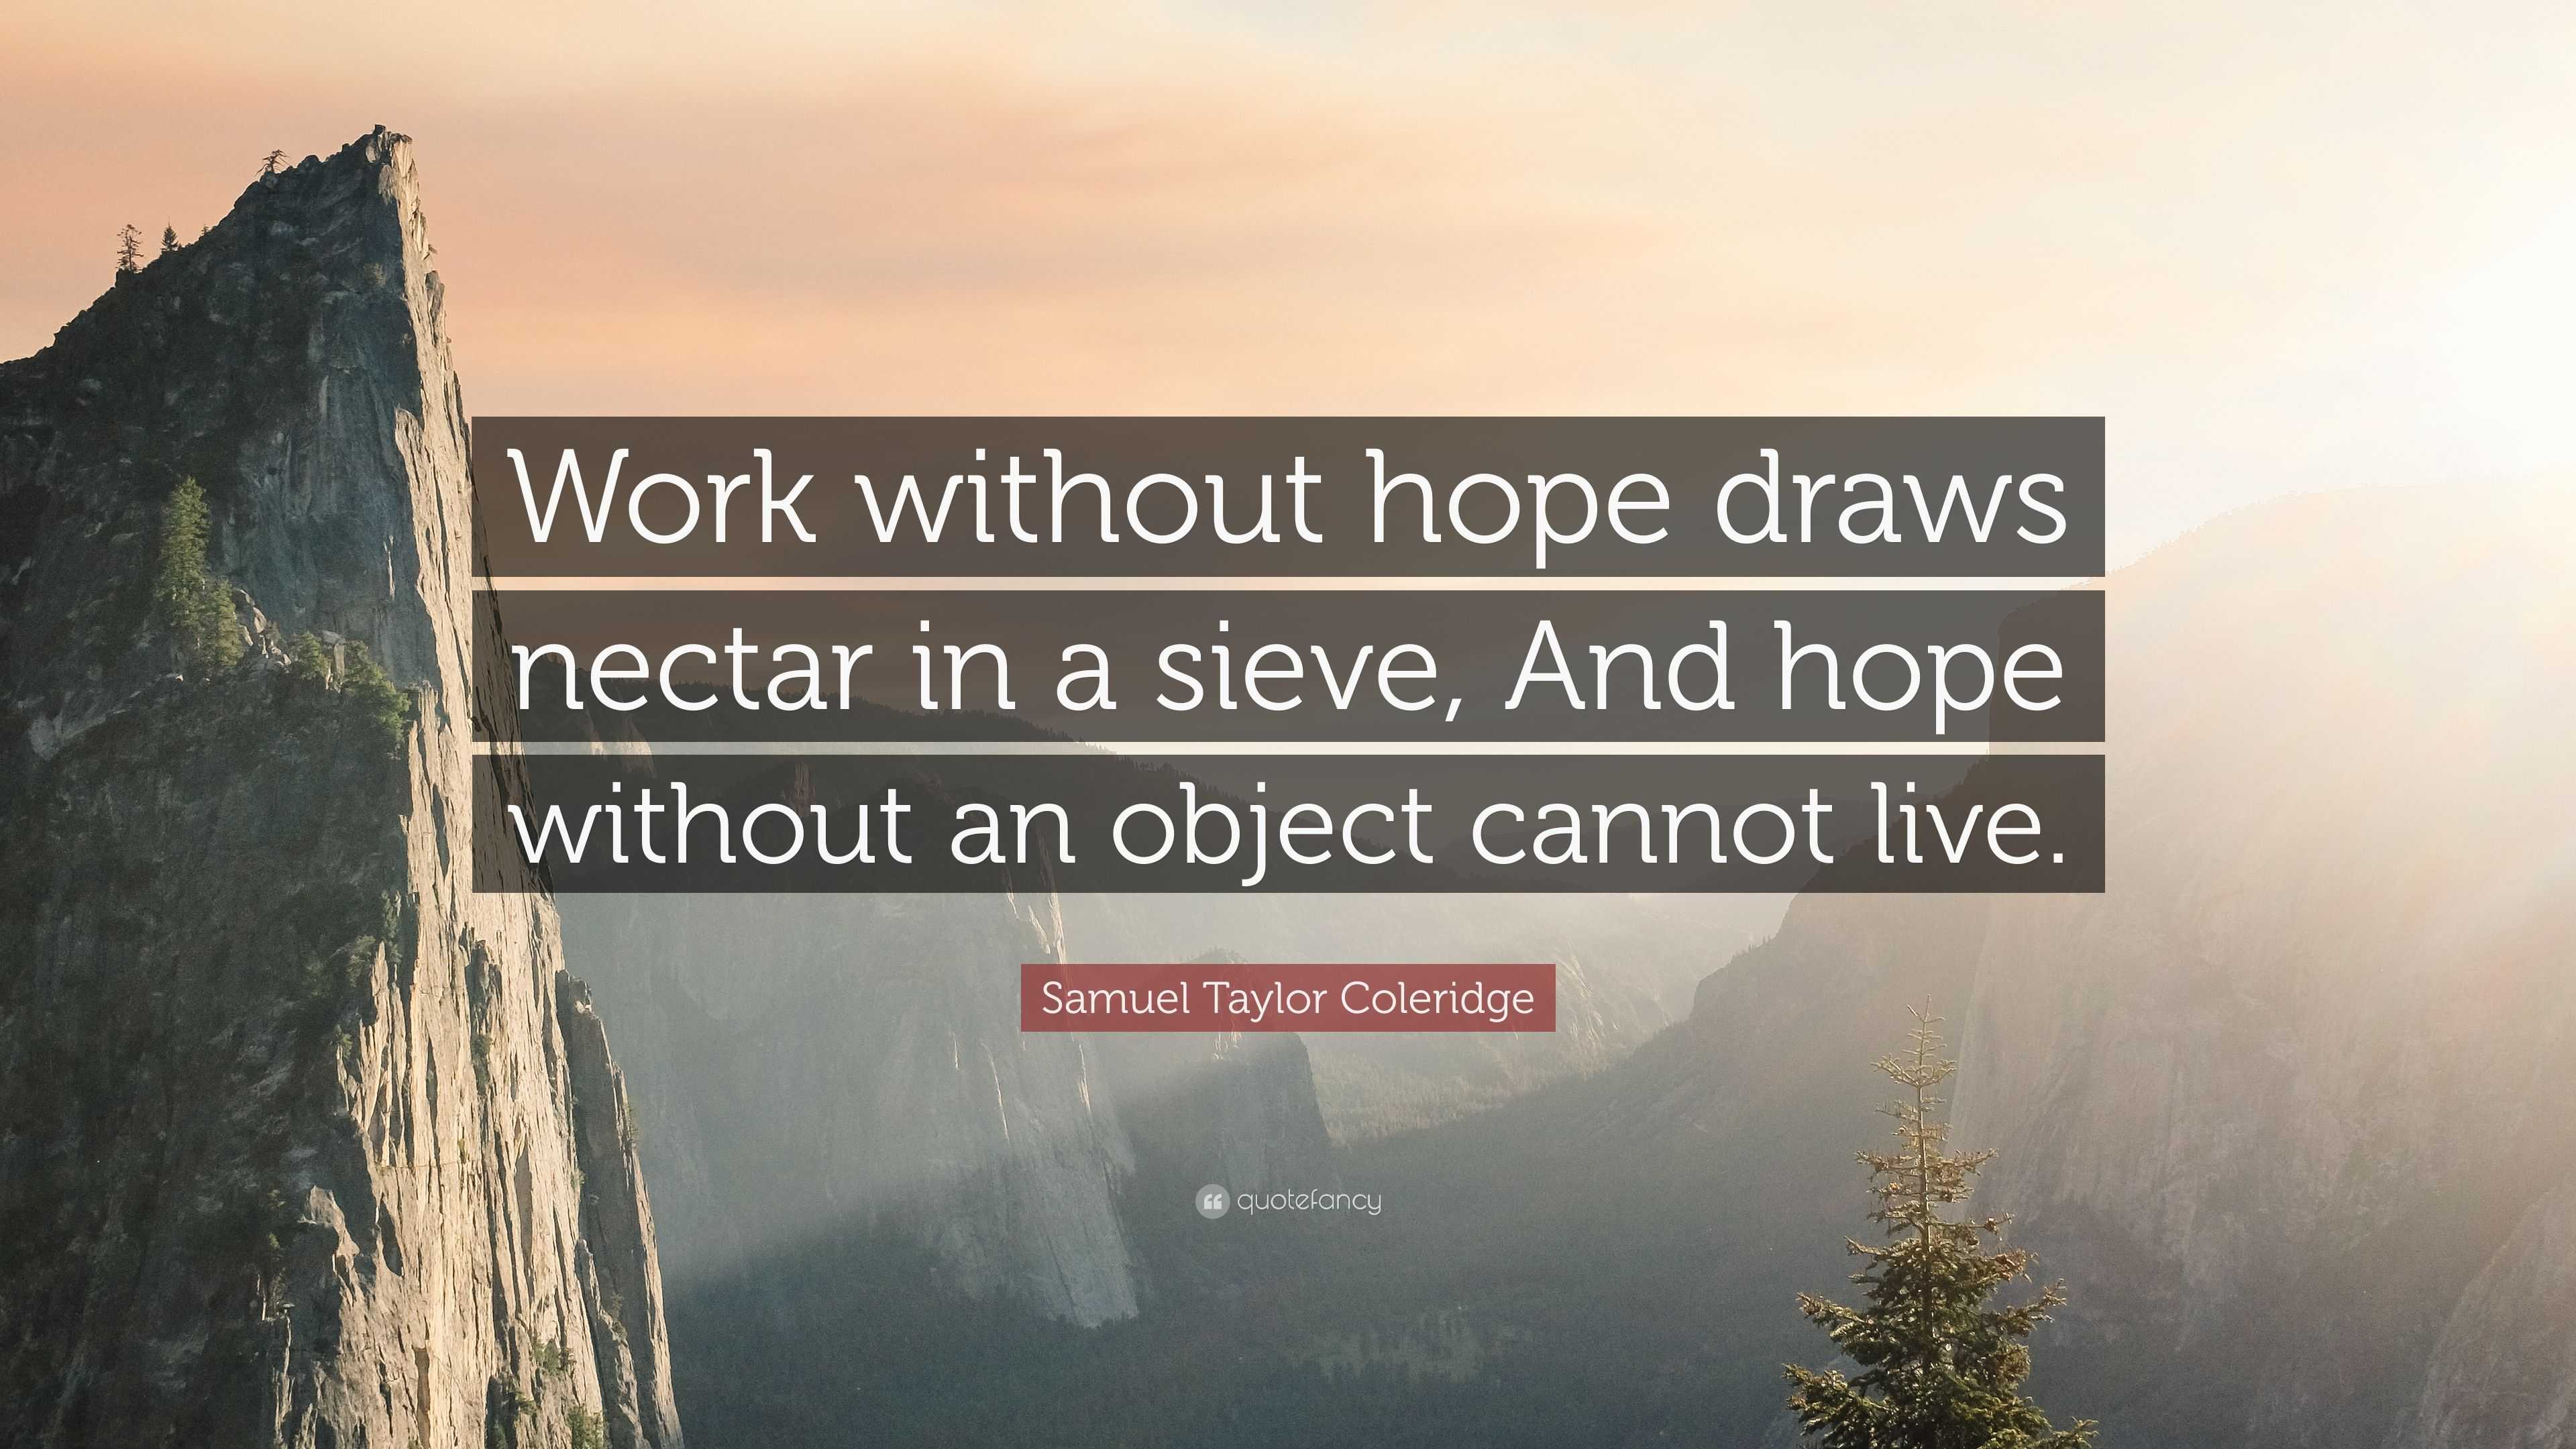 Samuel Taylor Coleridge Quote: “Work without hope draws nectar in a sieve, And hope ...3840 x 2160